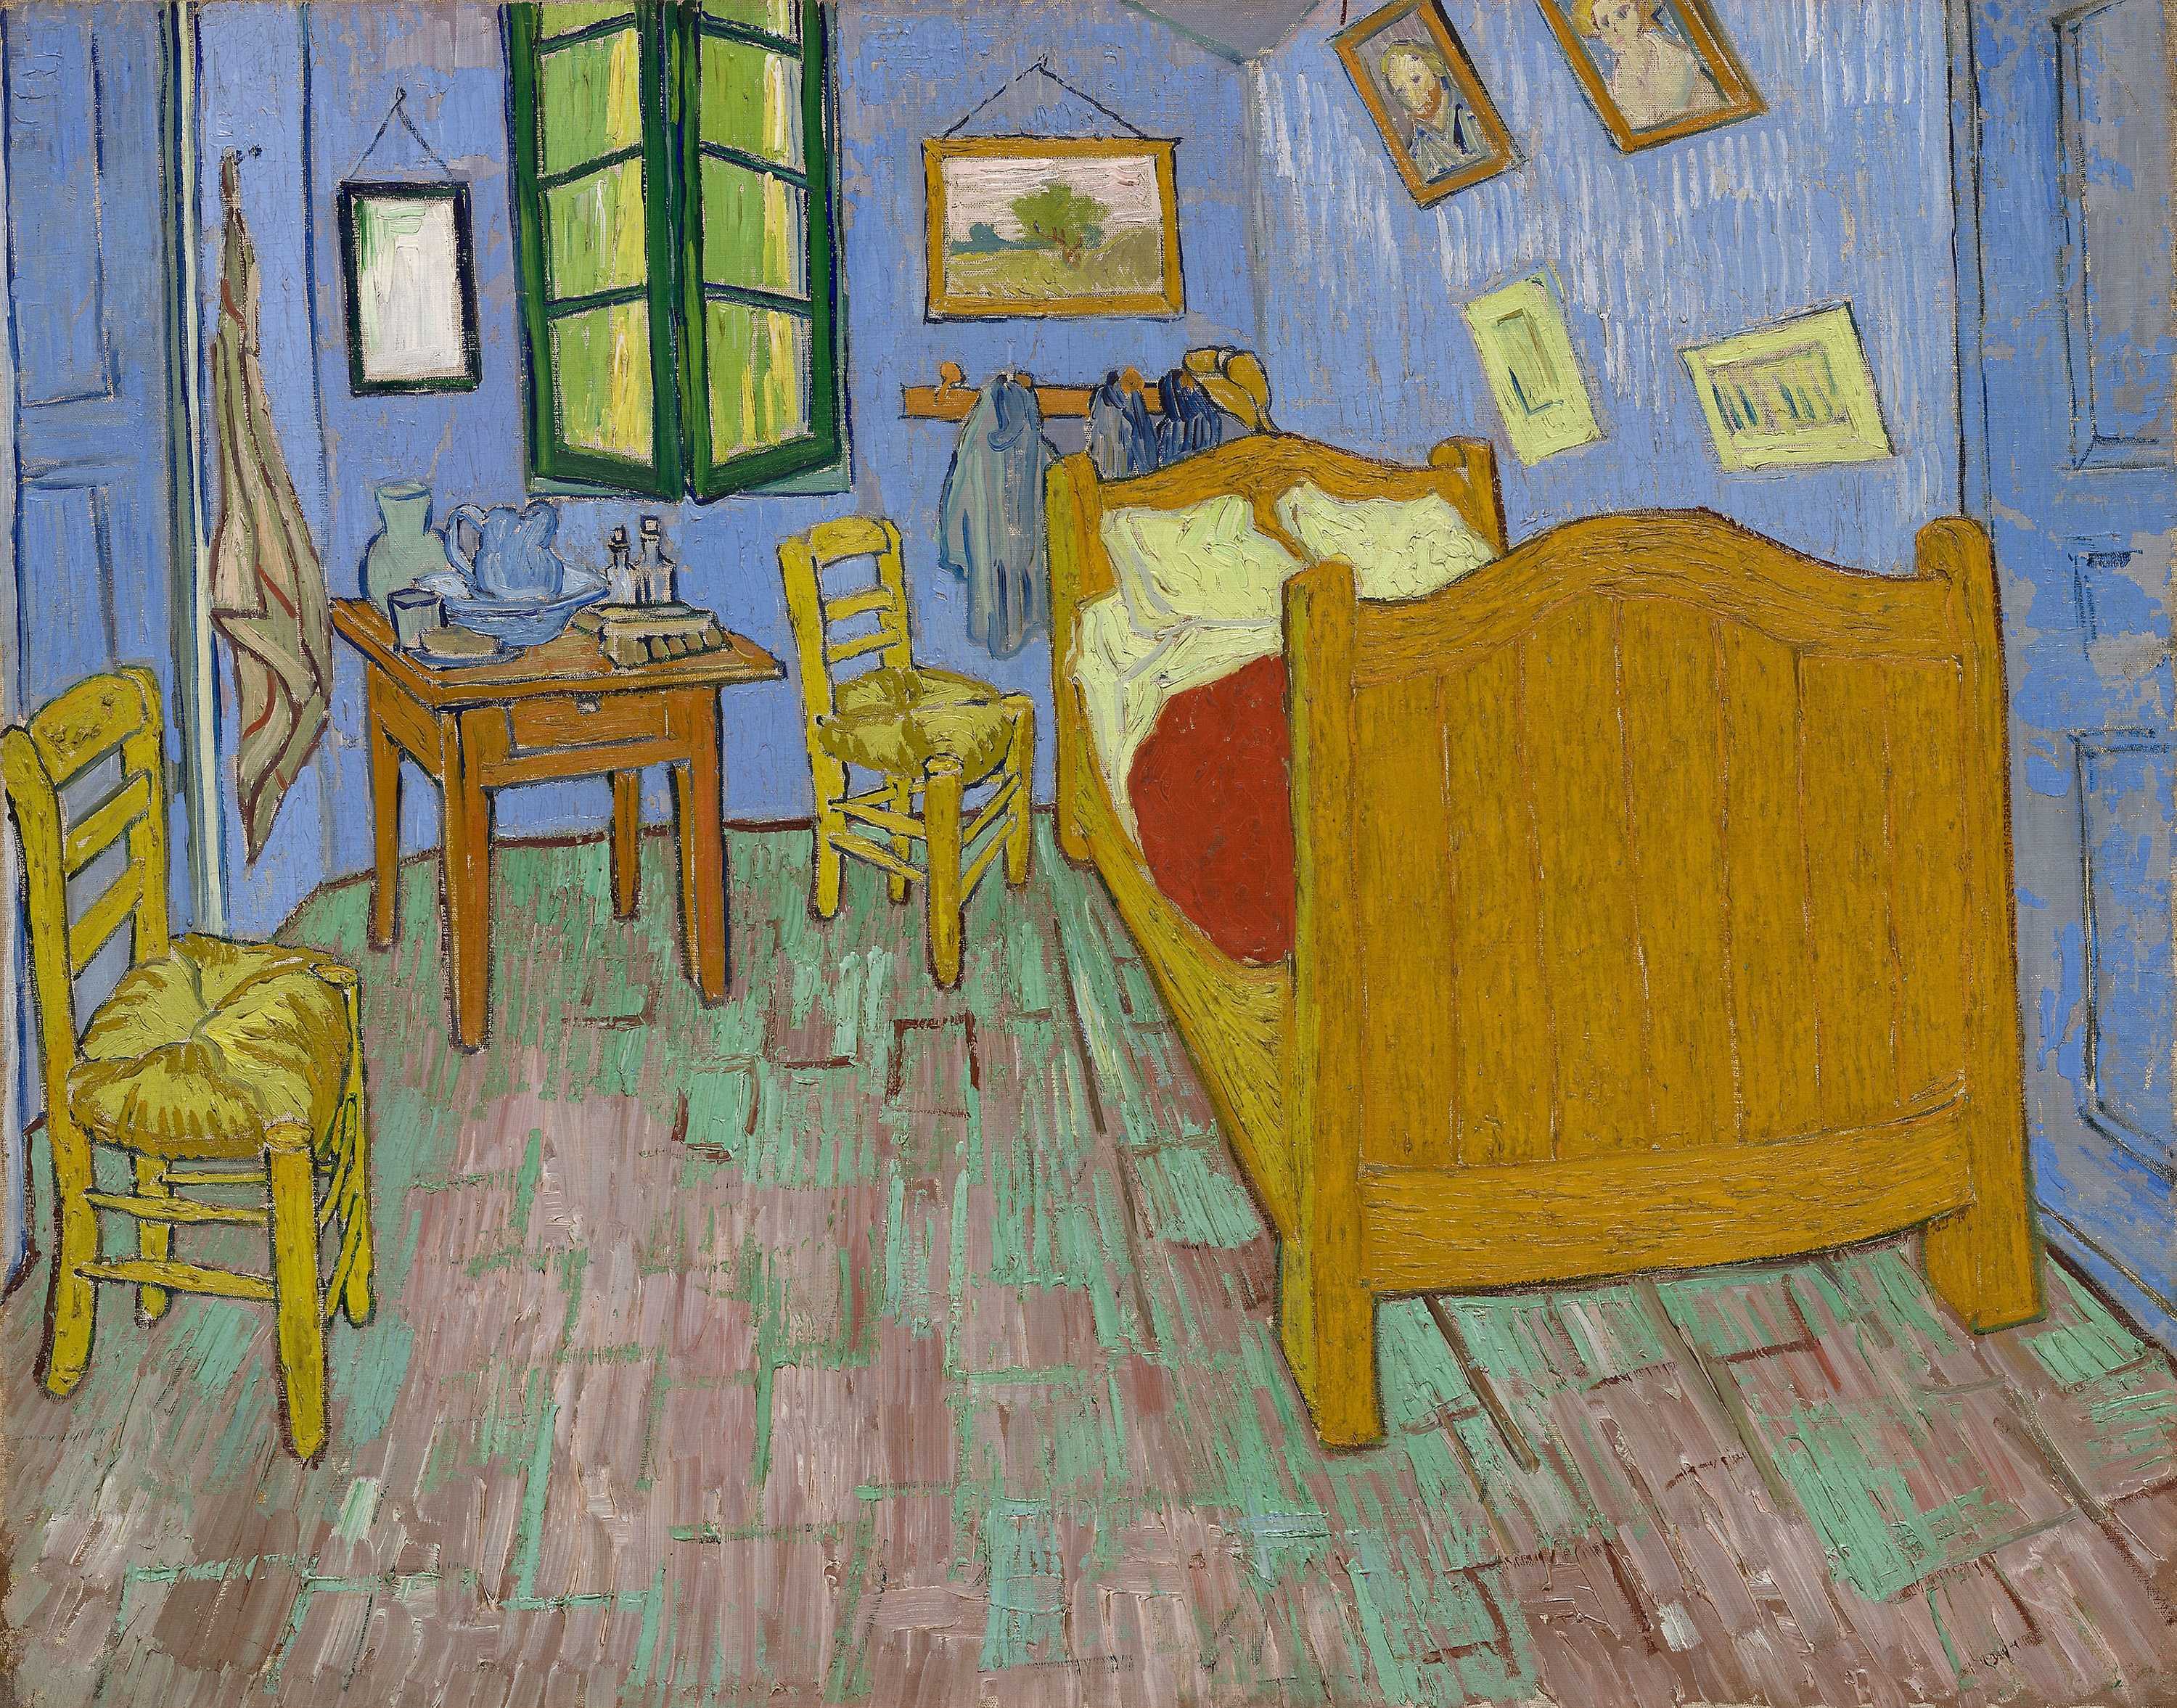 Find out more about Vincent Van Gogh - The Bedroom